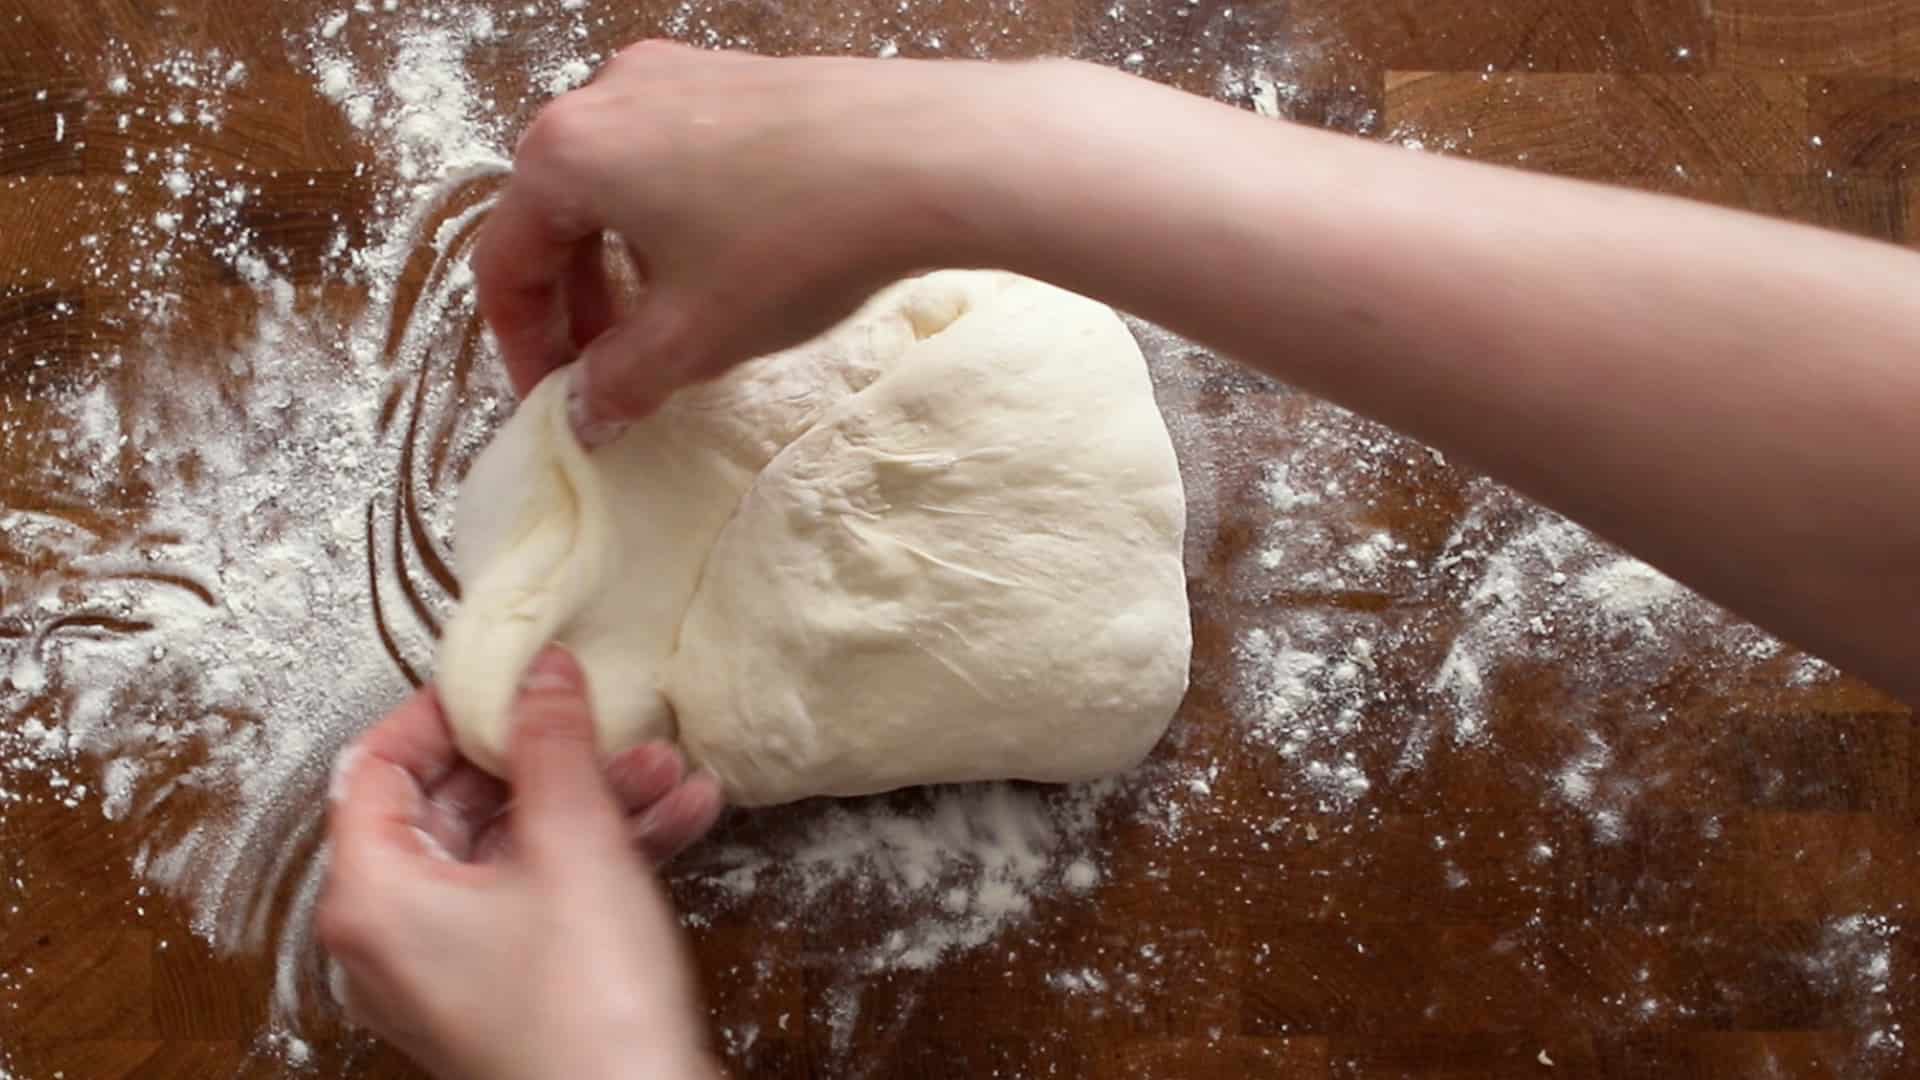 Stretching the left side of the dough